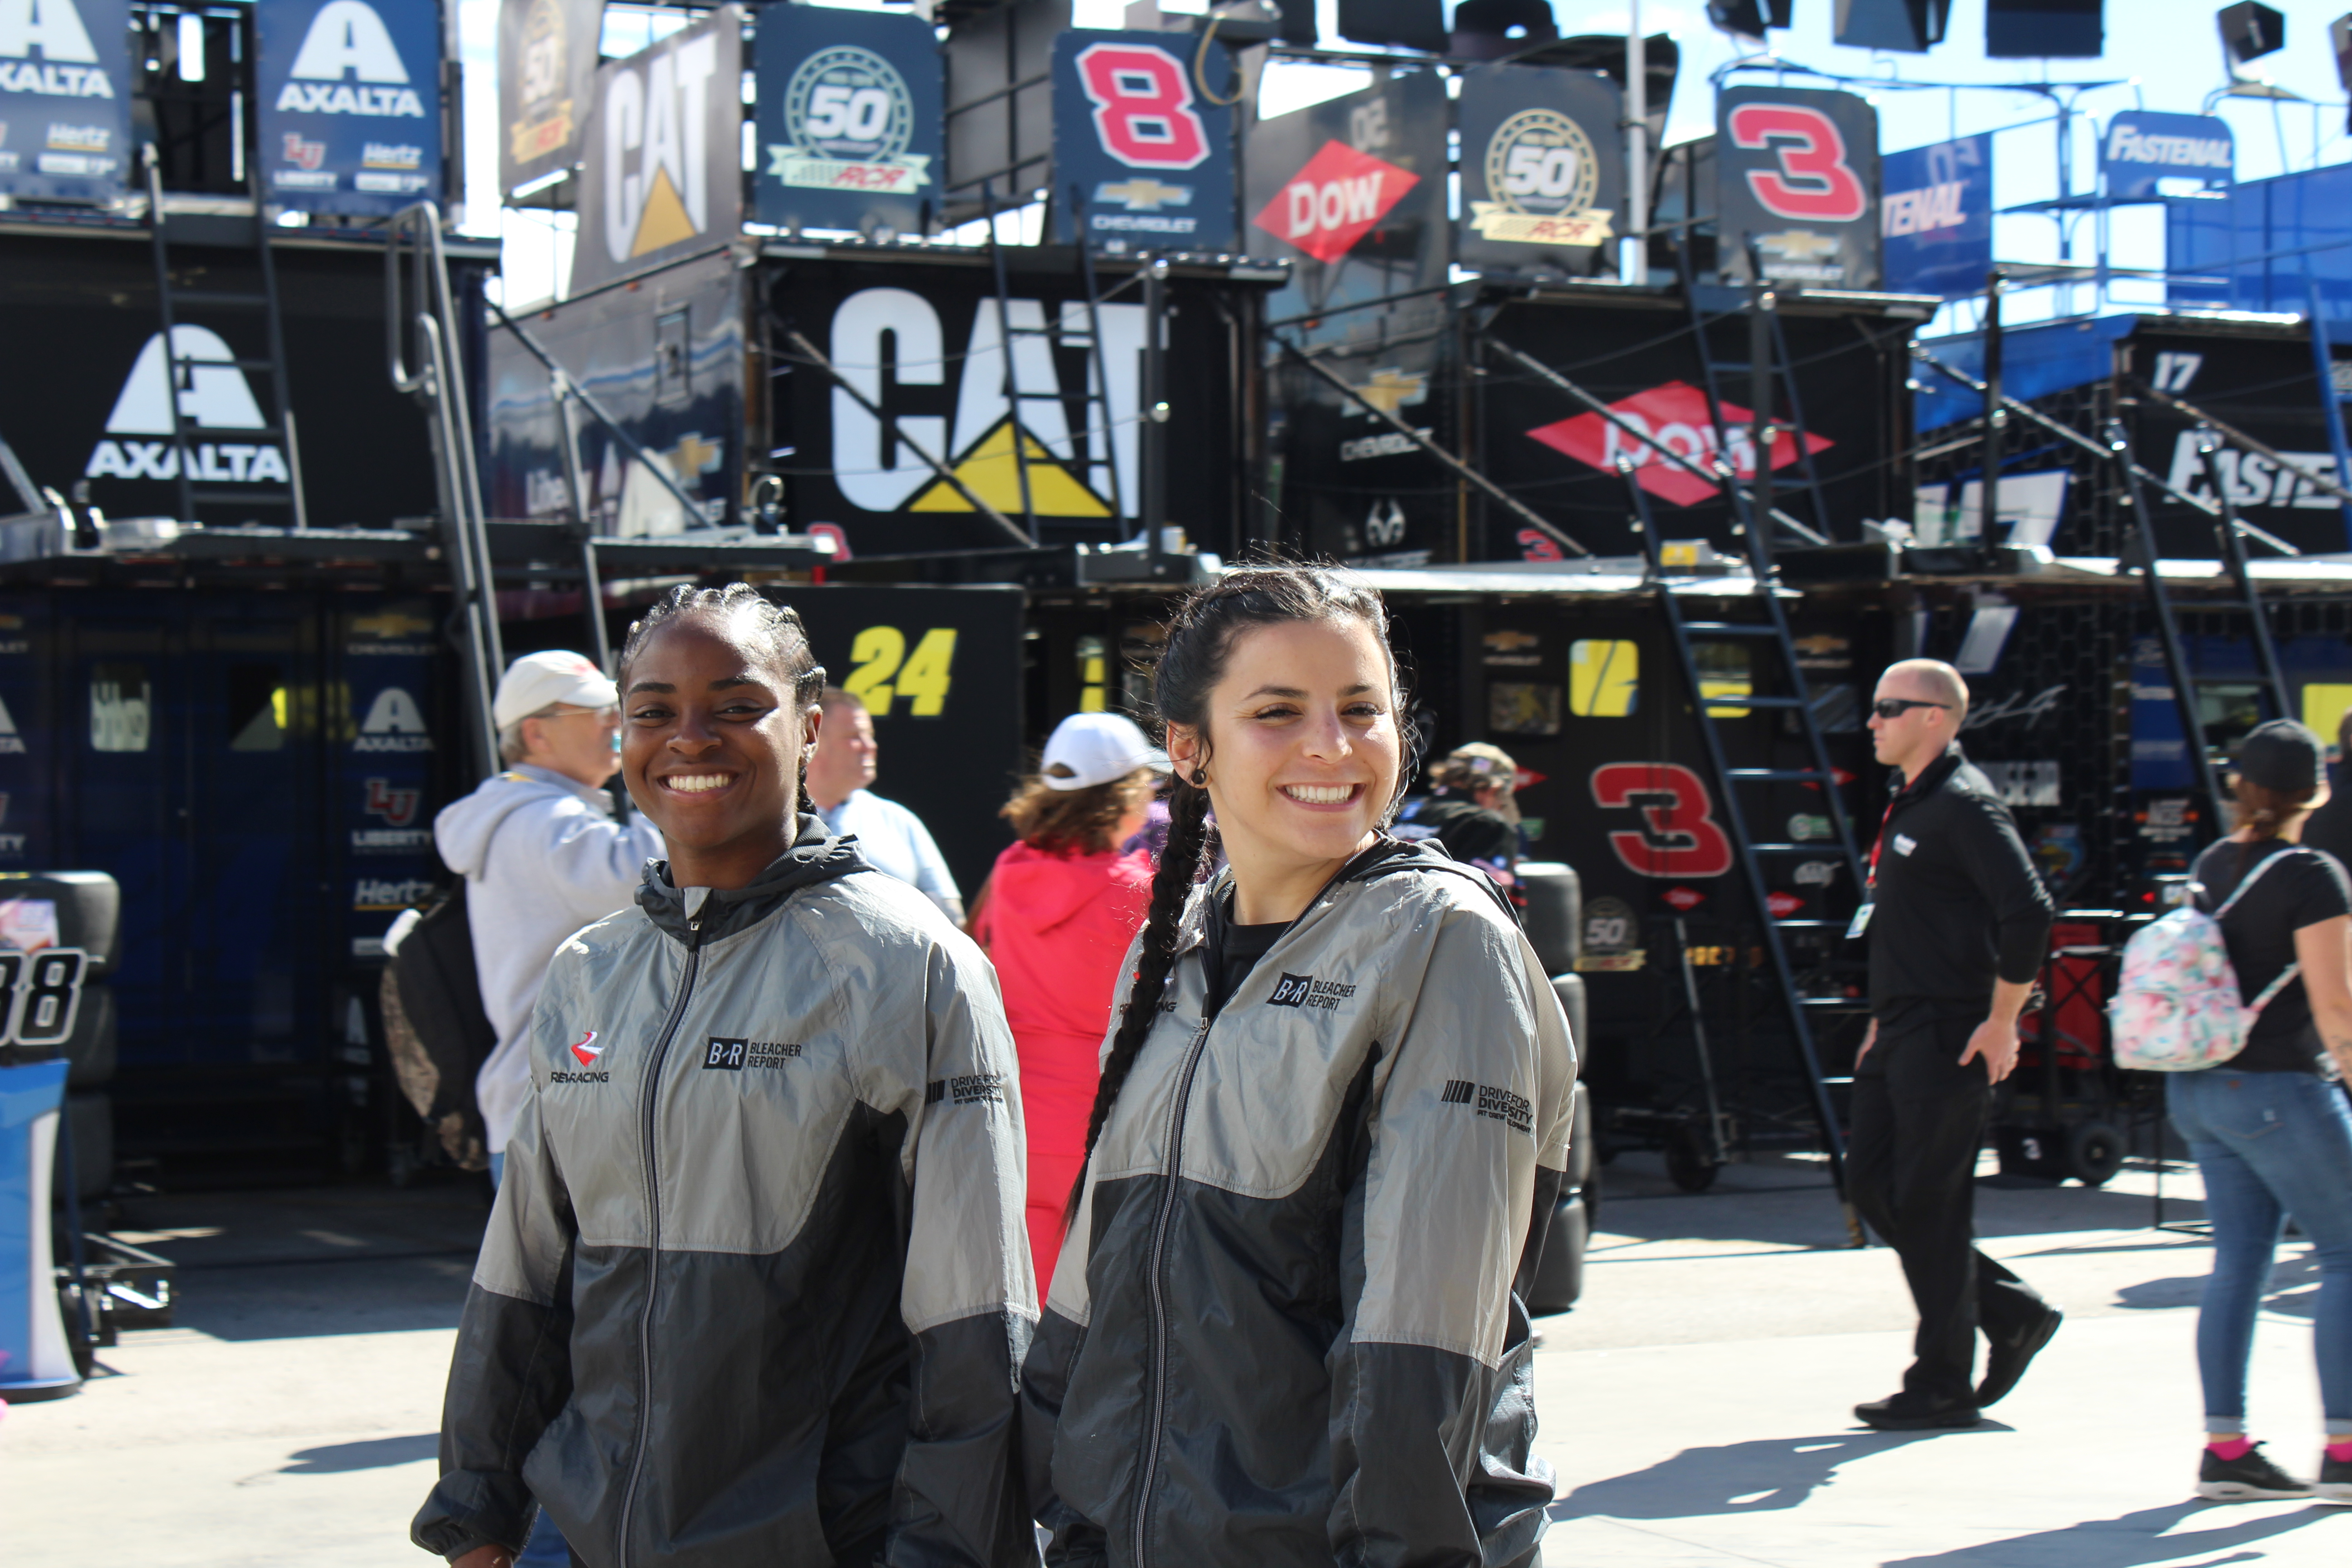 Conversely, O'Leary and her friend Brehanna Daniels have made tremendous strides in NASCAR. (Photo Credit: Jose L. Acero Jr/TPF)